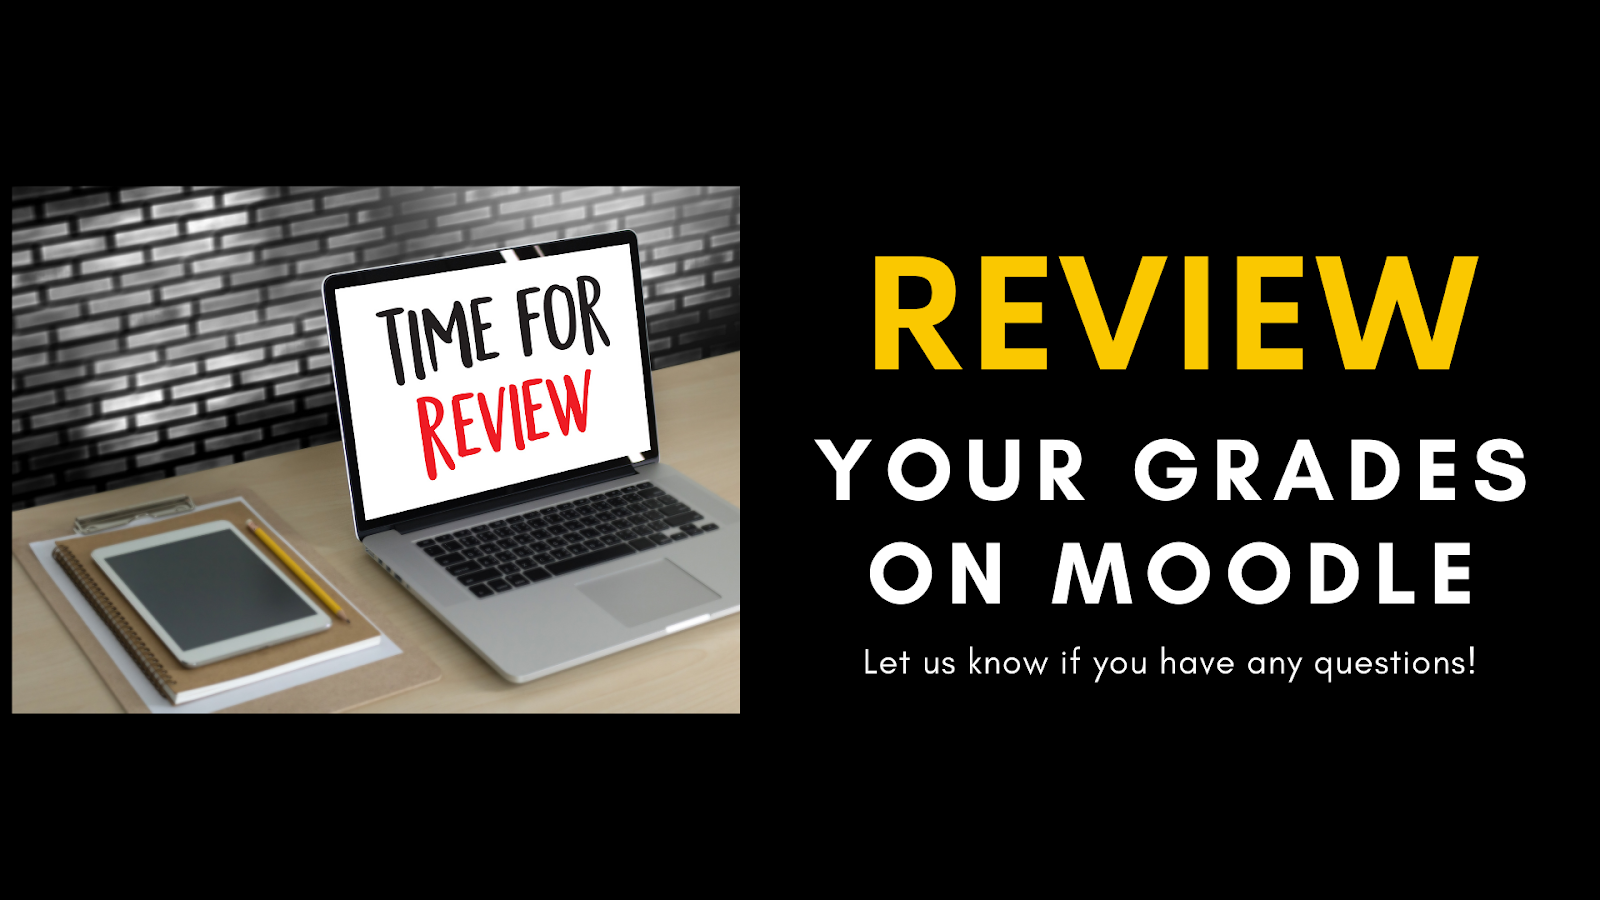 TIME TO REVIEW: Review your grades on Moodle. Let us know if you have any questions!